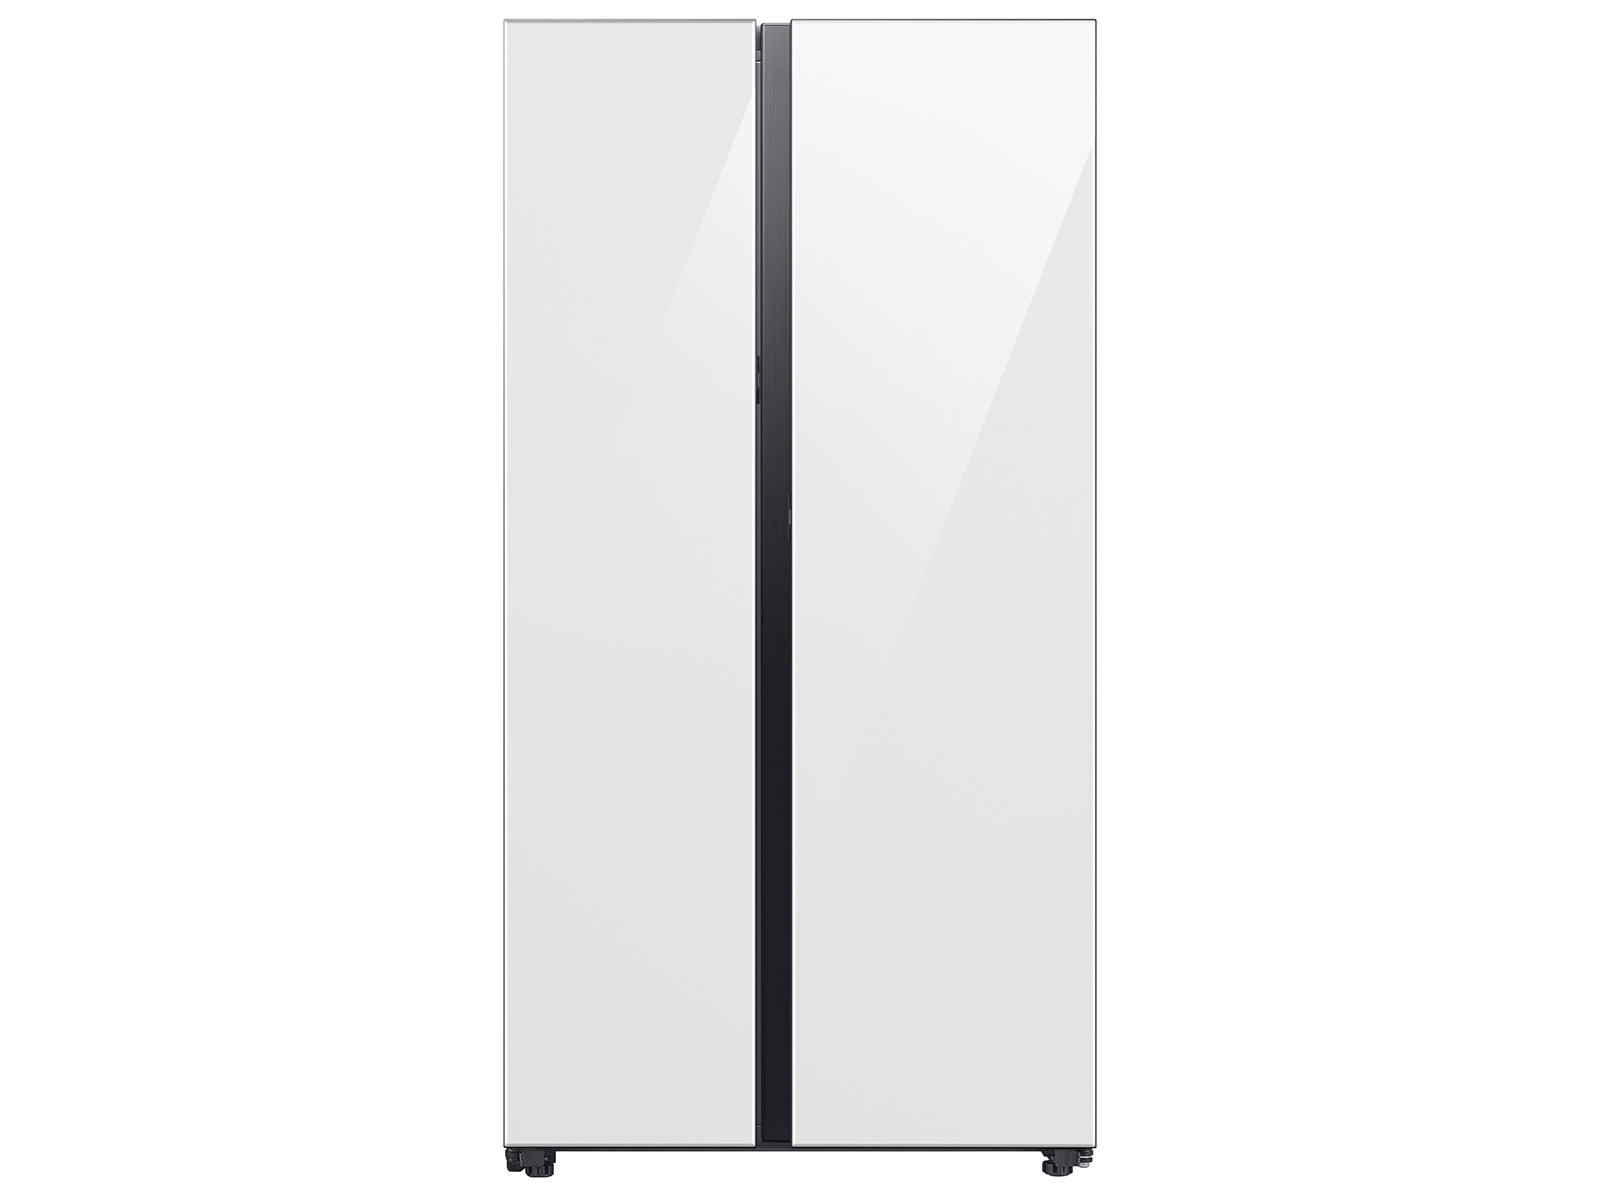 Photos - Fridge Samsung Bespoke Counter Depth Side-by-Side 23 cu. ft. Refrigerator with Be 